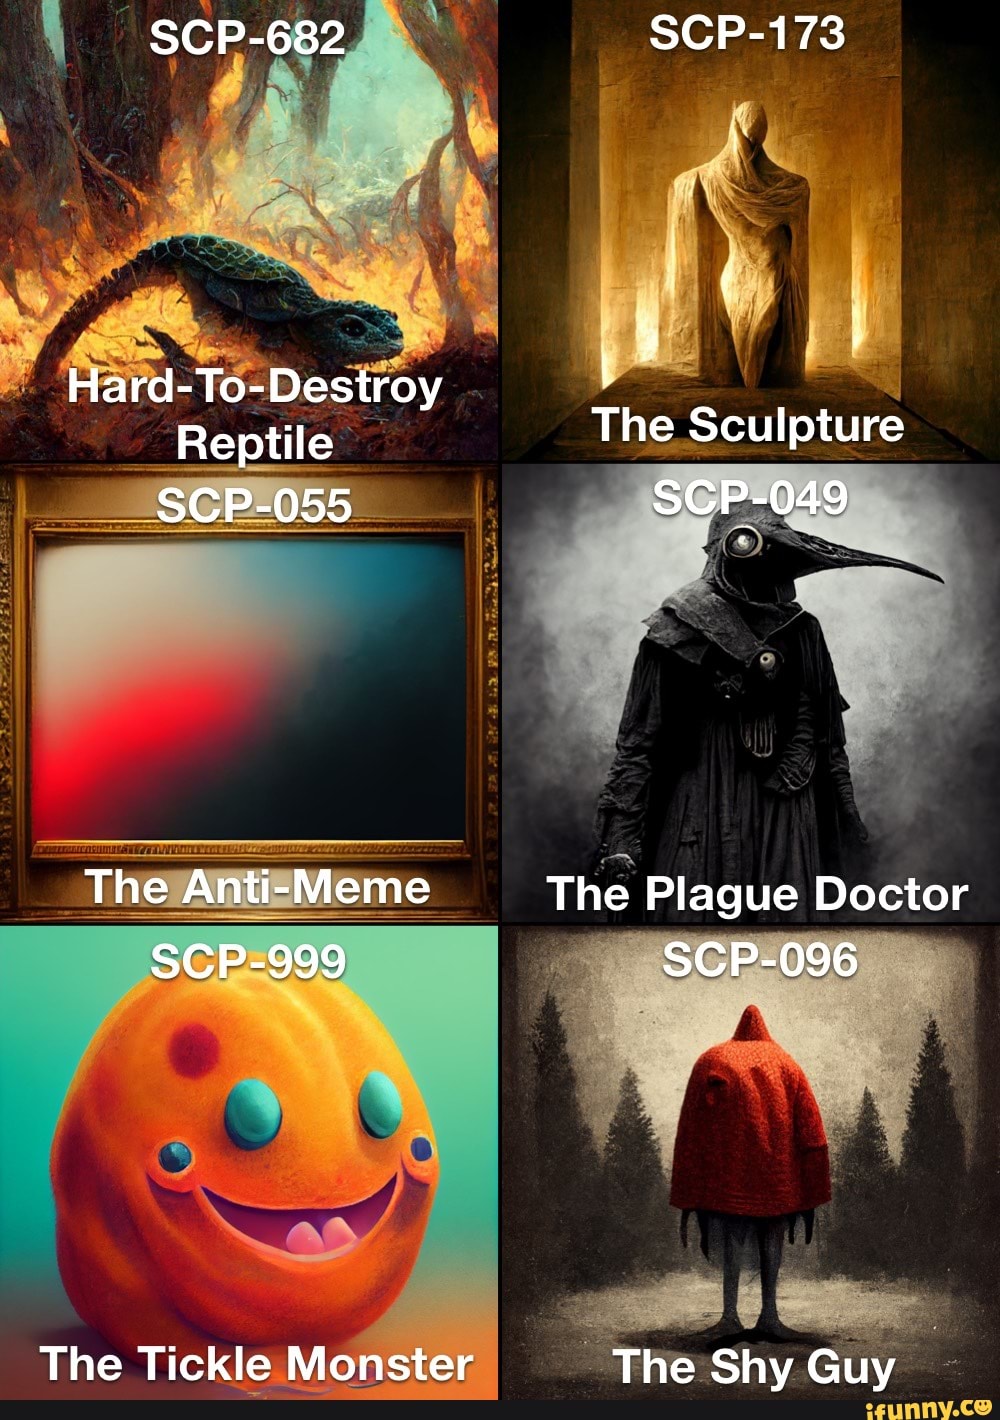 I keep getting put on SCP-055 research. I think someone's messing with